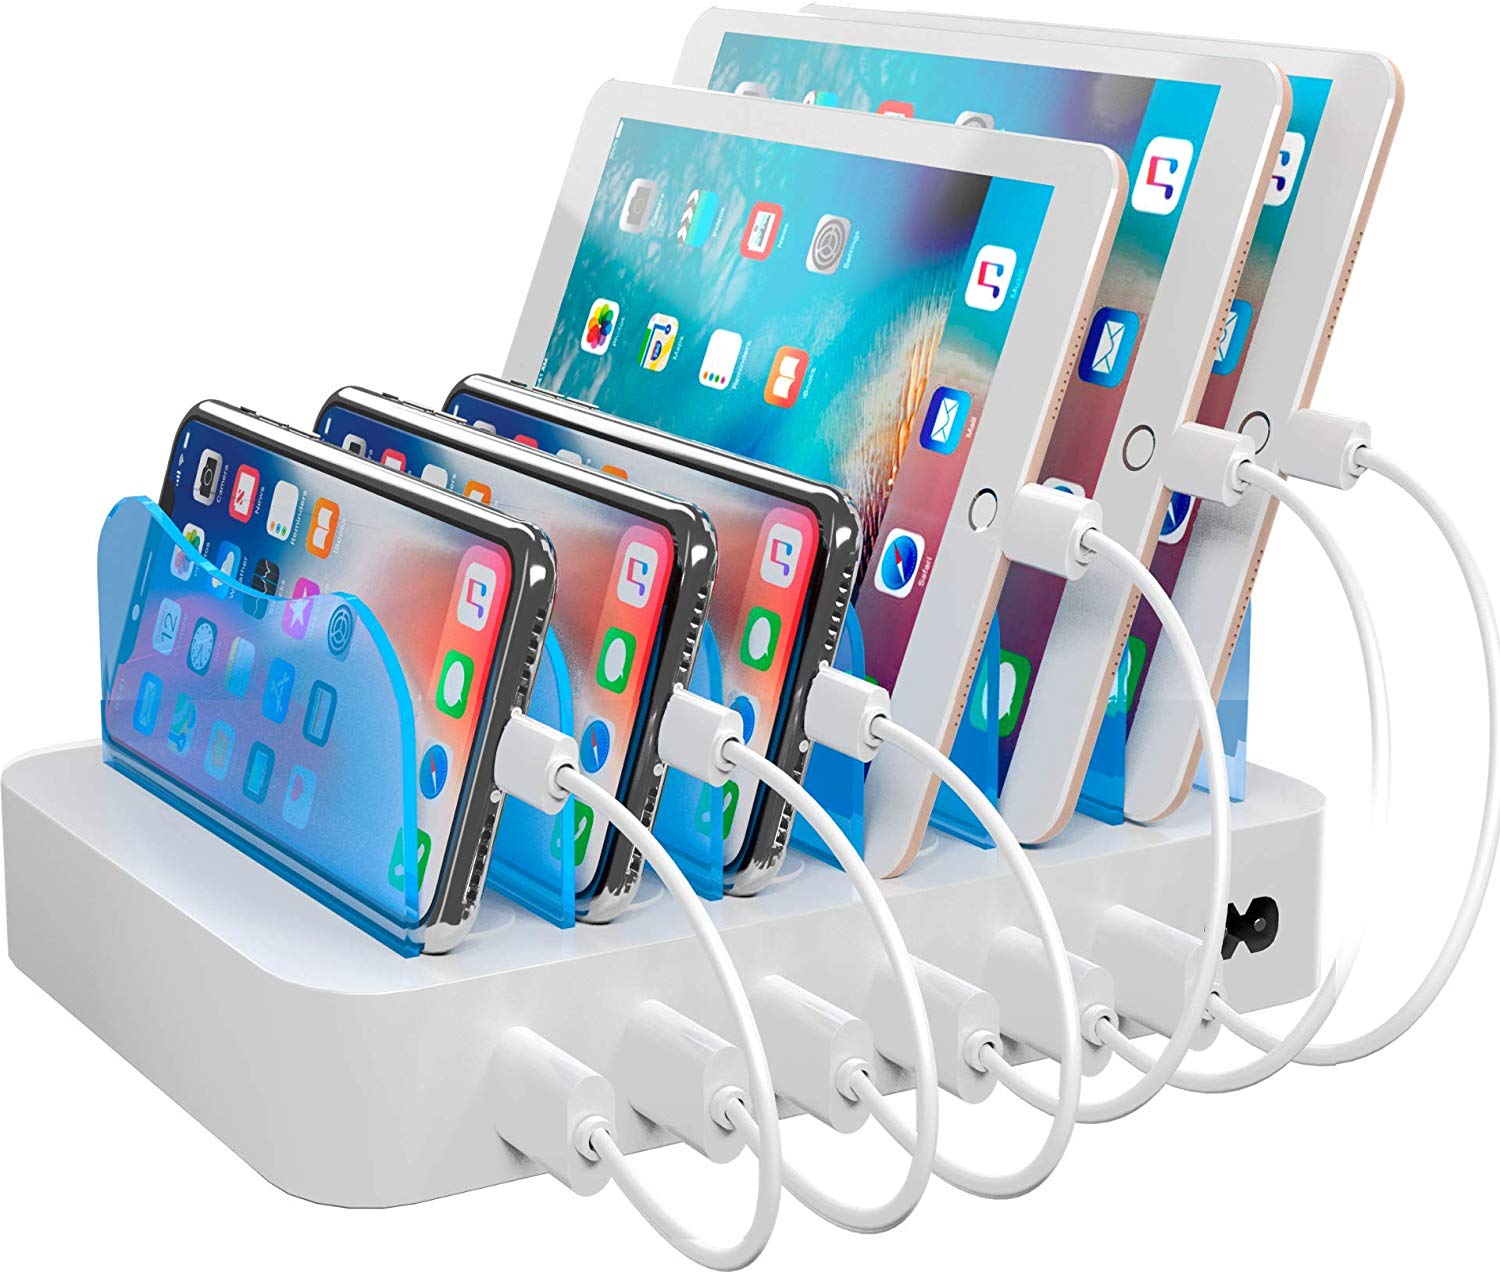 Organizer and Multi-Device Charger